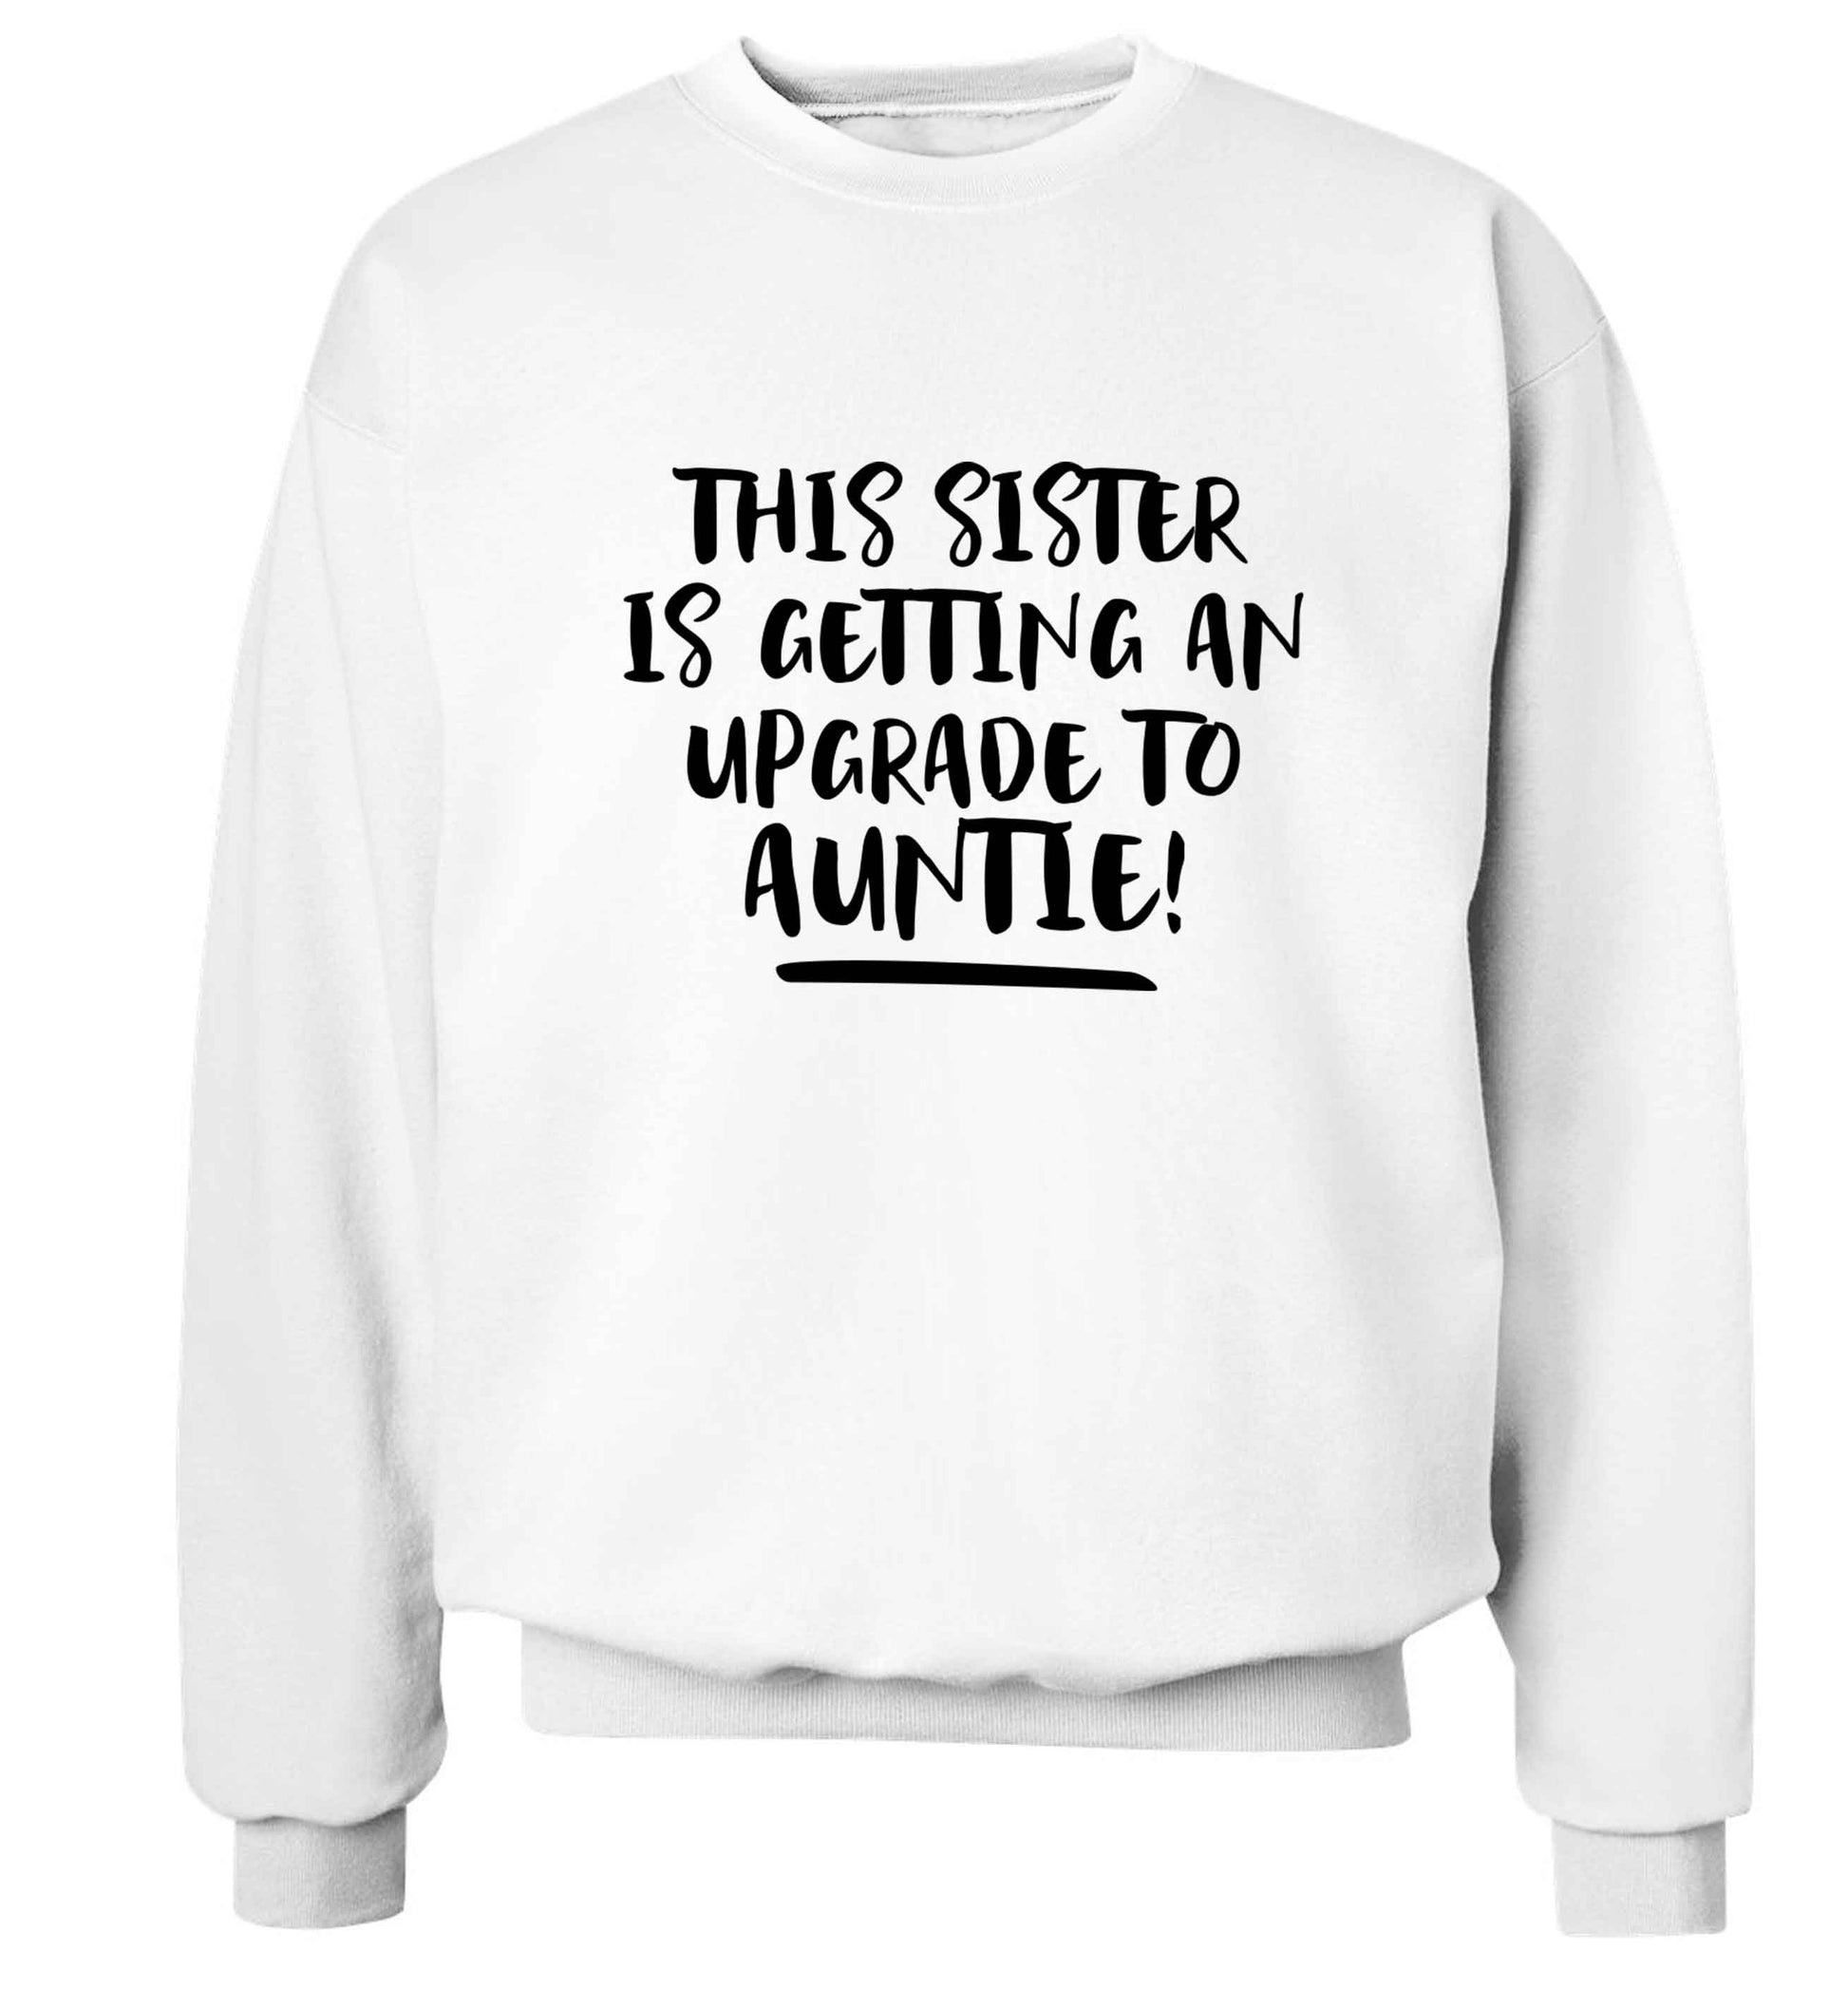 This sister is getting an upgrade to auntie! Adult's unisex white Sweater 2XL